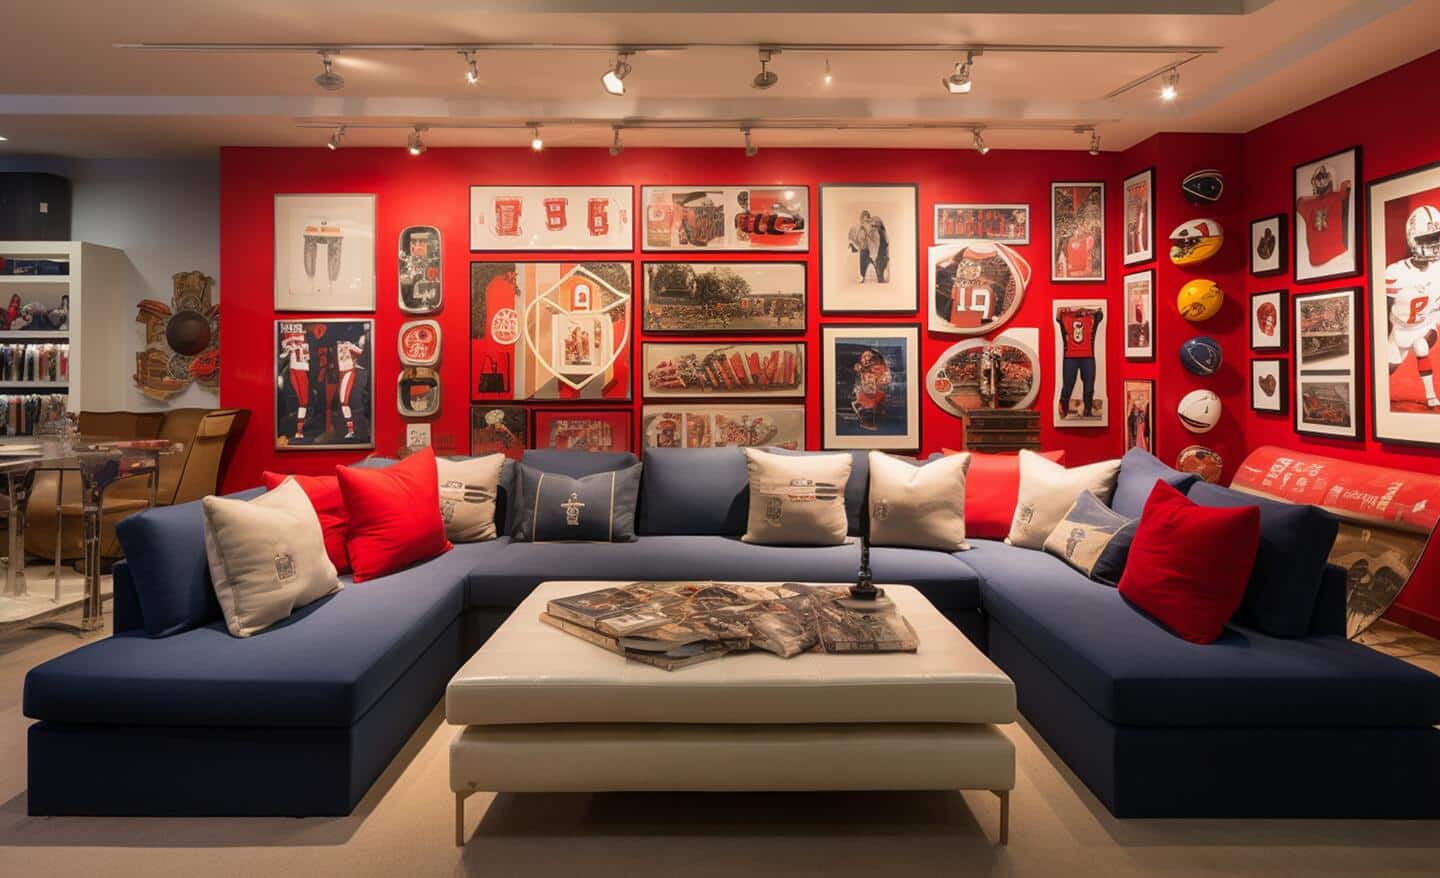 A family room with walls covered in sports-themed wall art and collectibles.